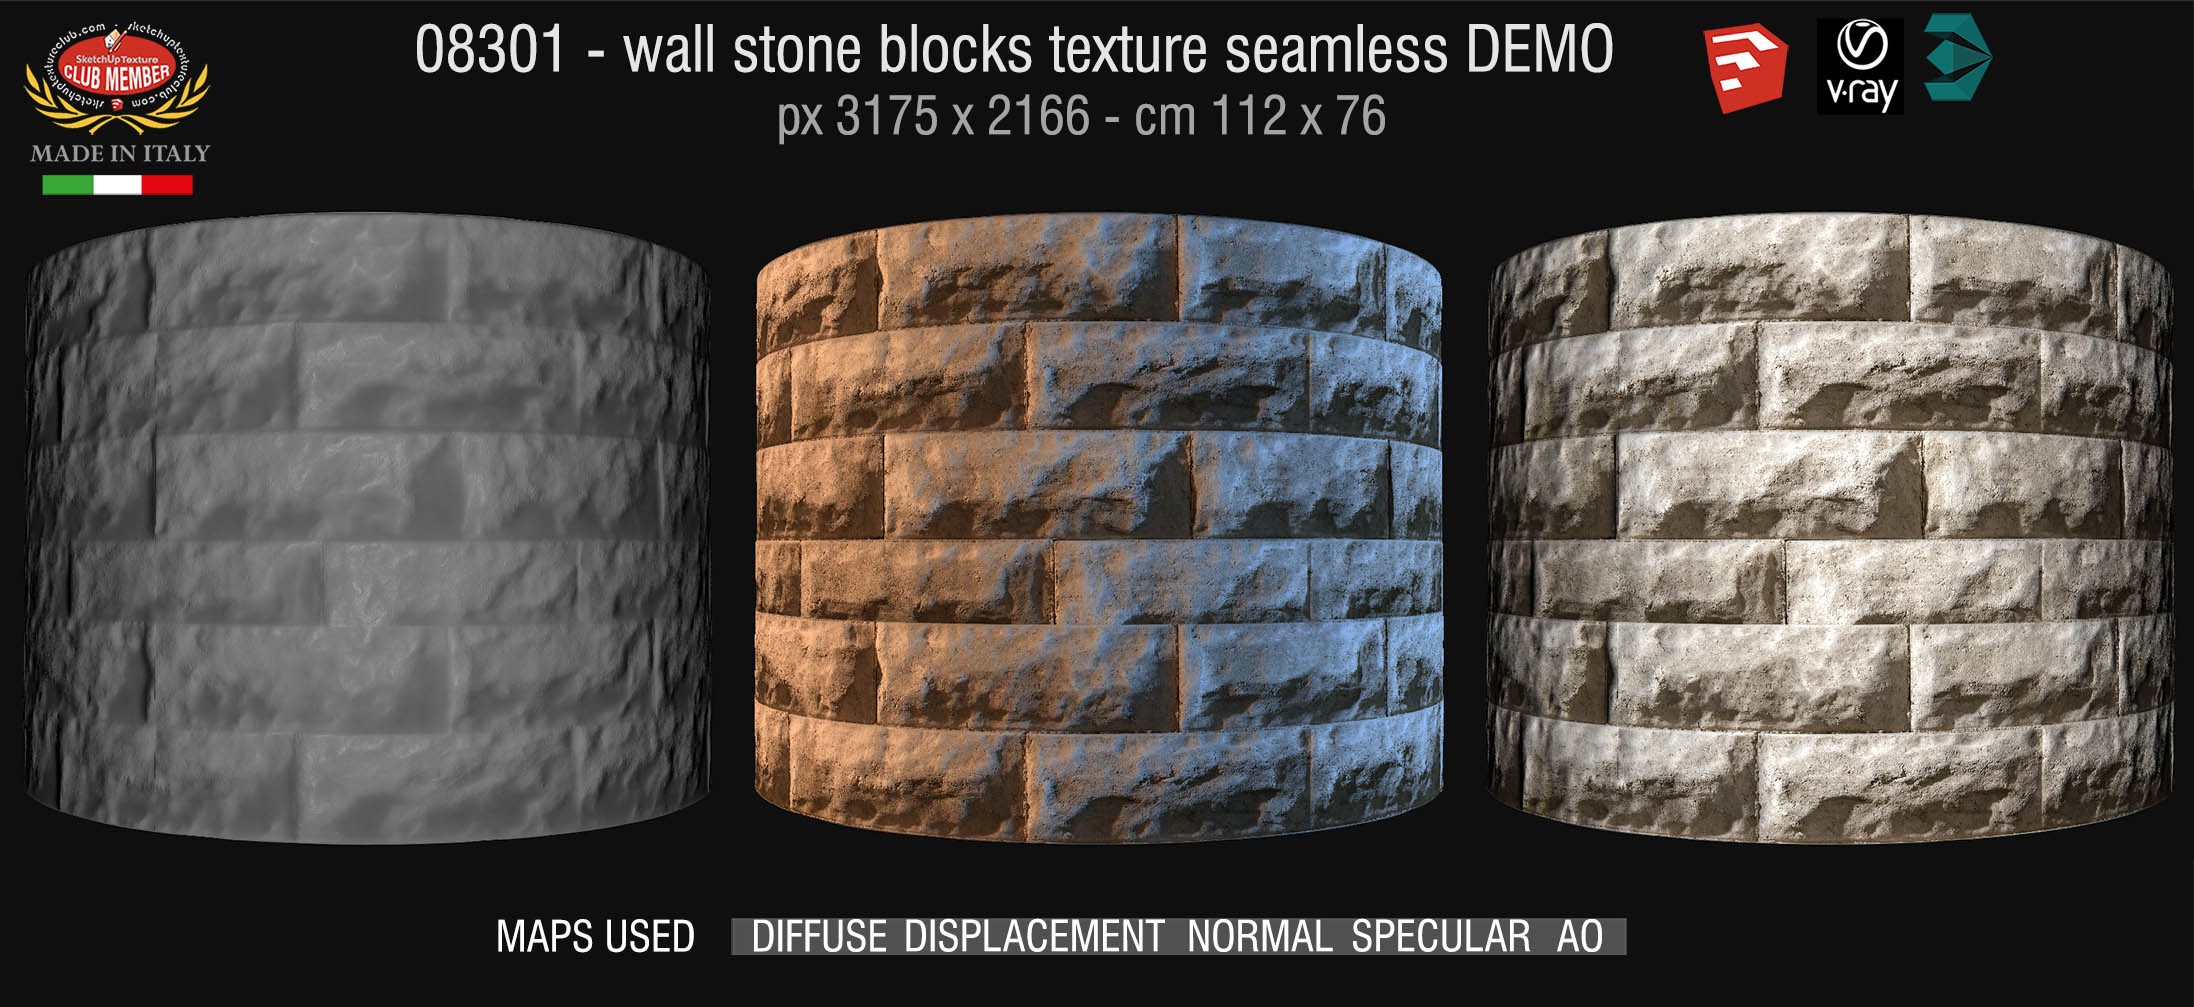 08301 HR Wall stone with regular blocks texture + maps DEMO